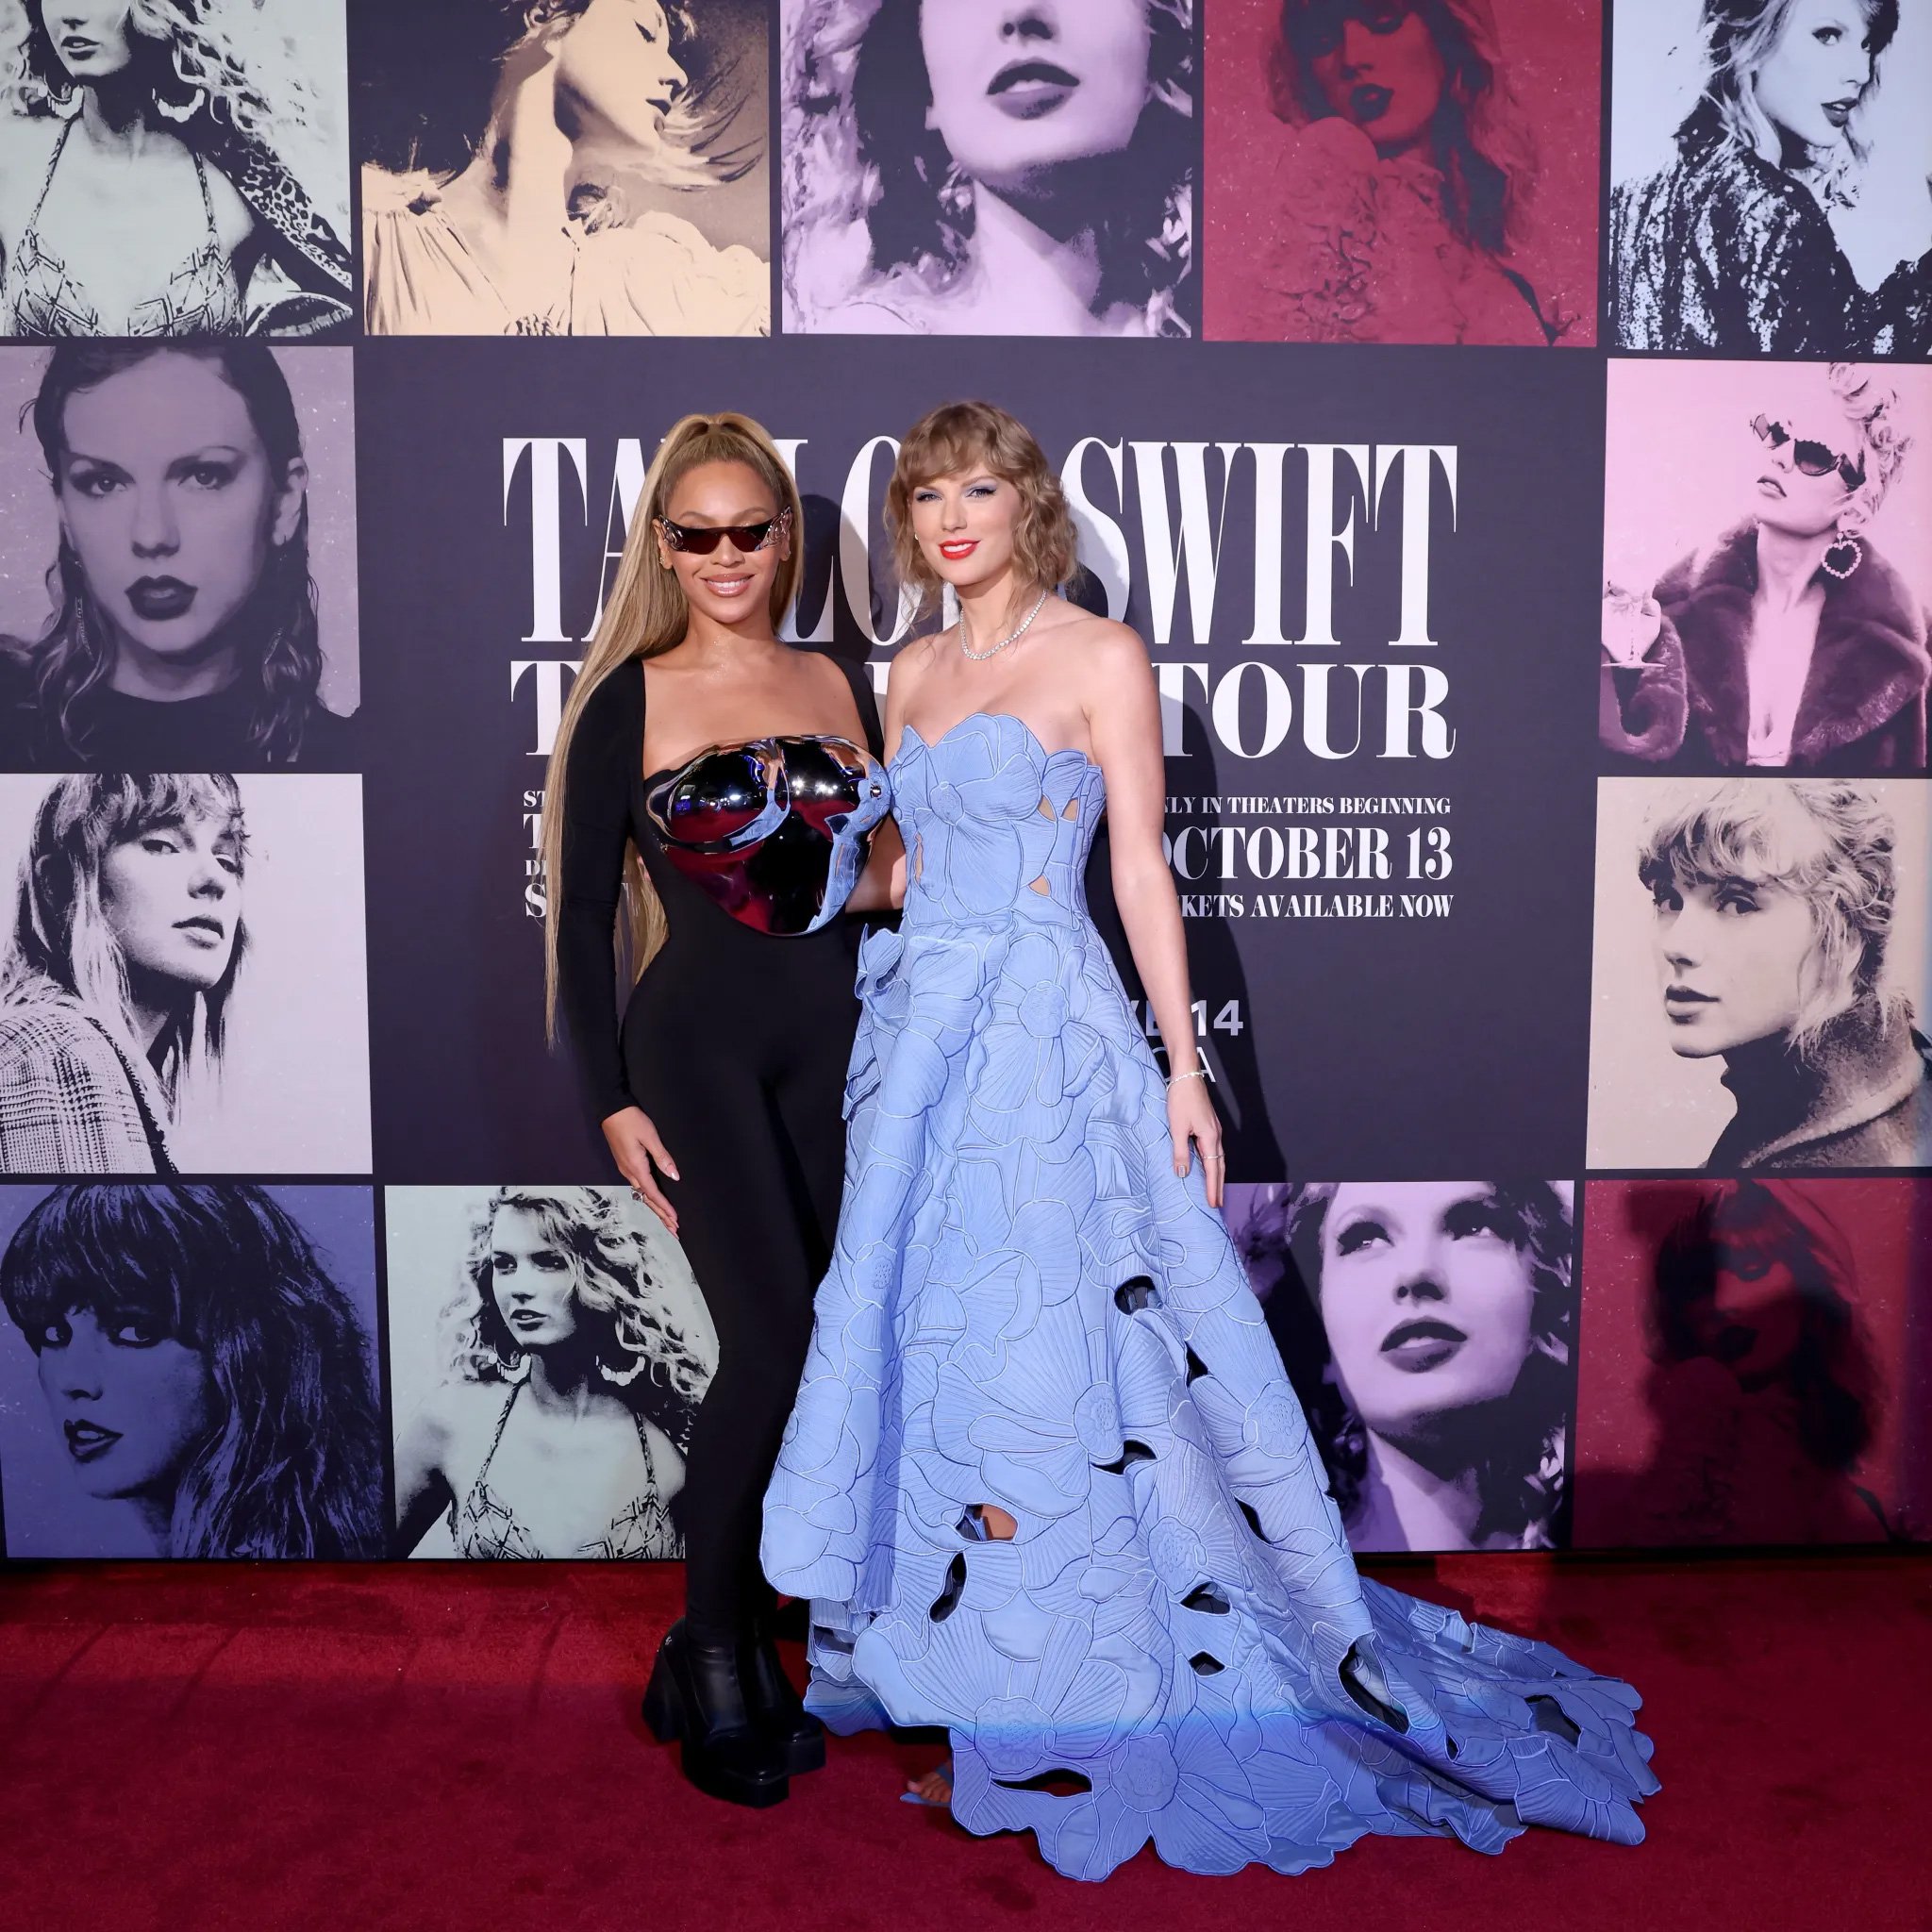 Taylor Posing with Beyonce